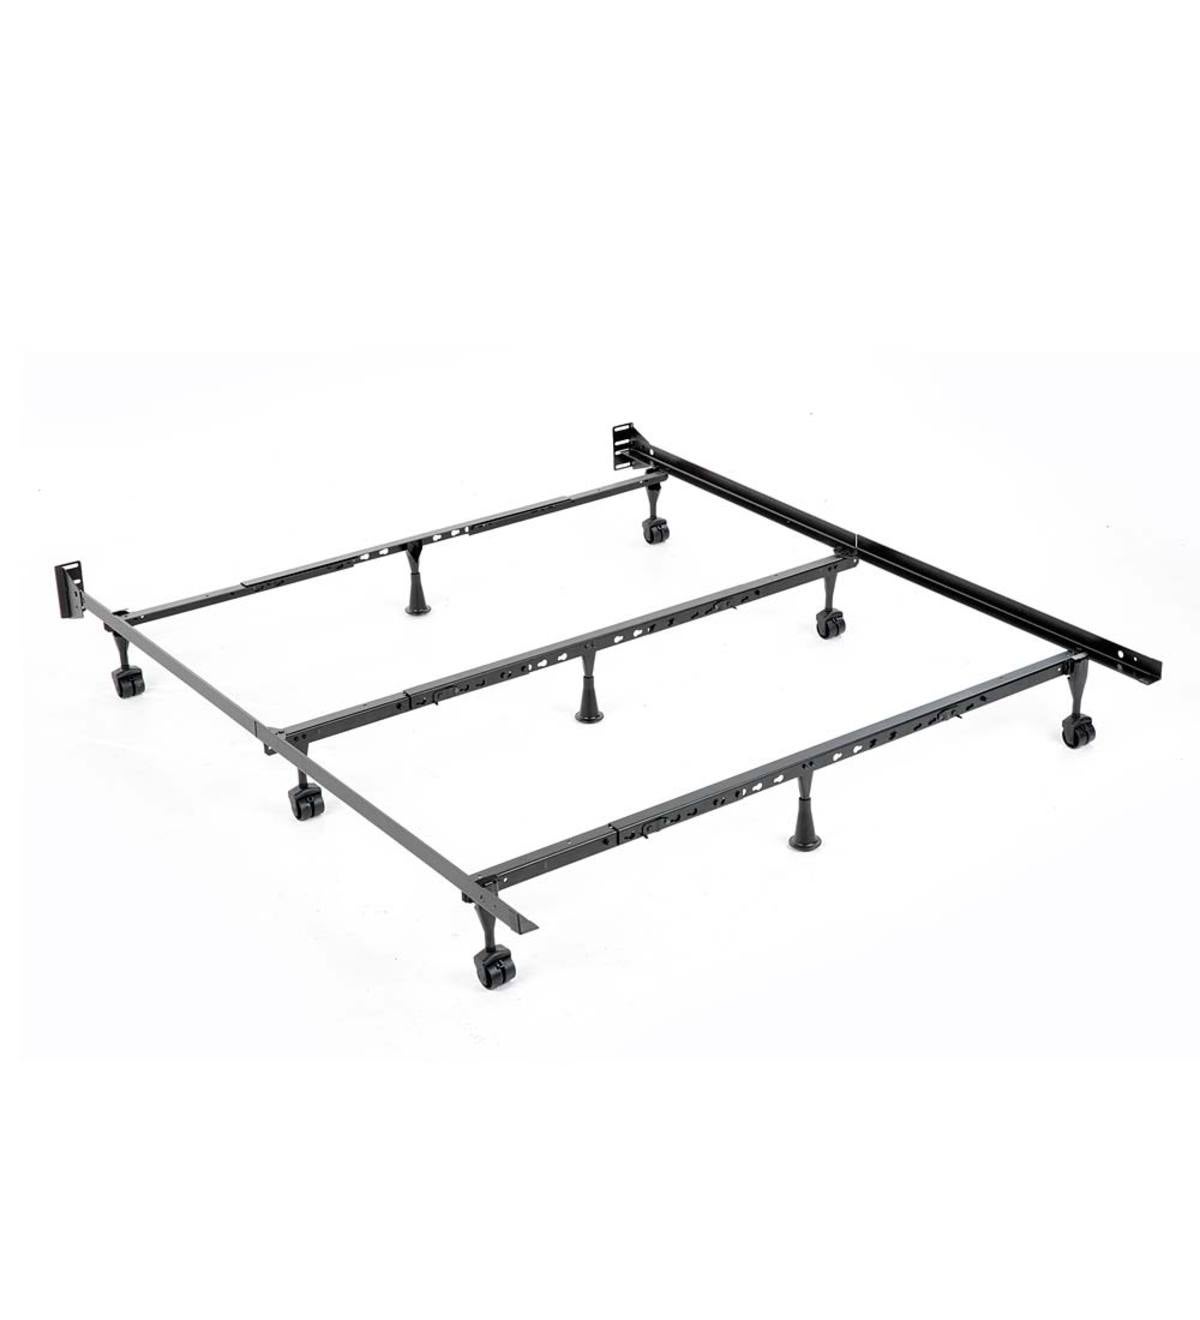 Compact Universal Folding Bed Frame